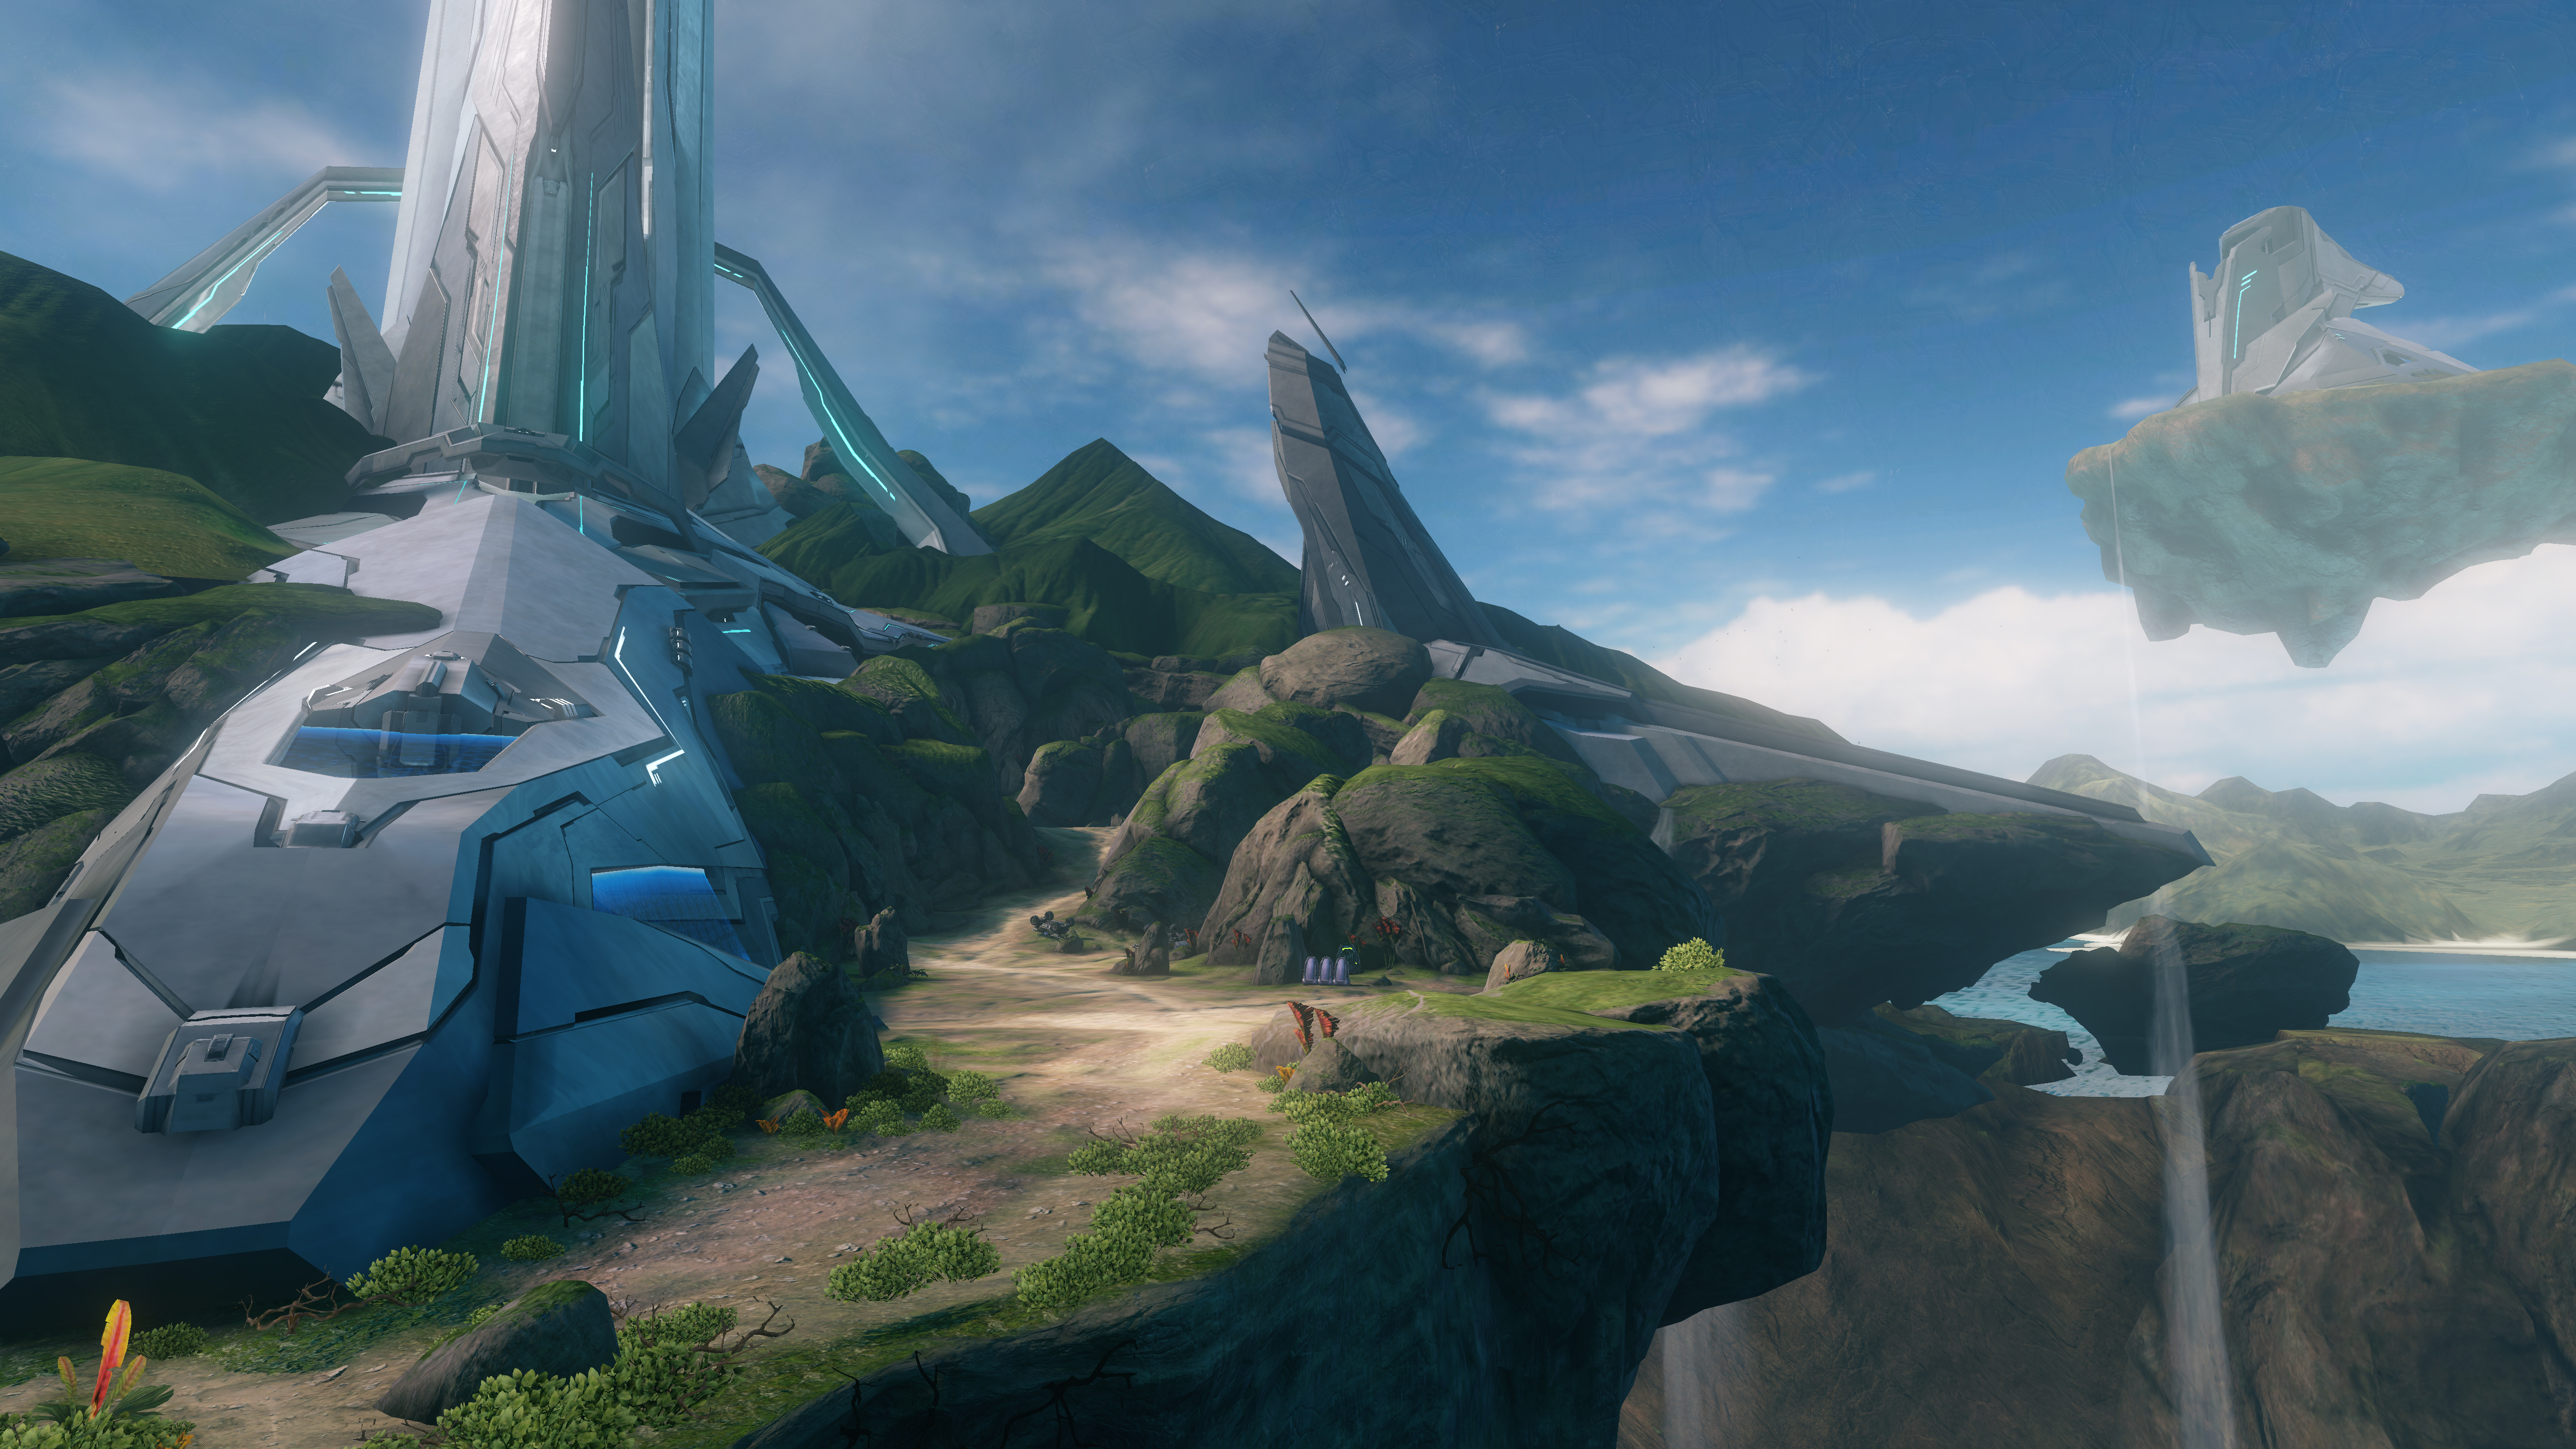 Video Game Halo 4 5120x2880